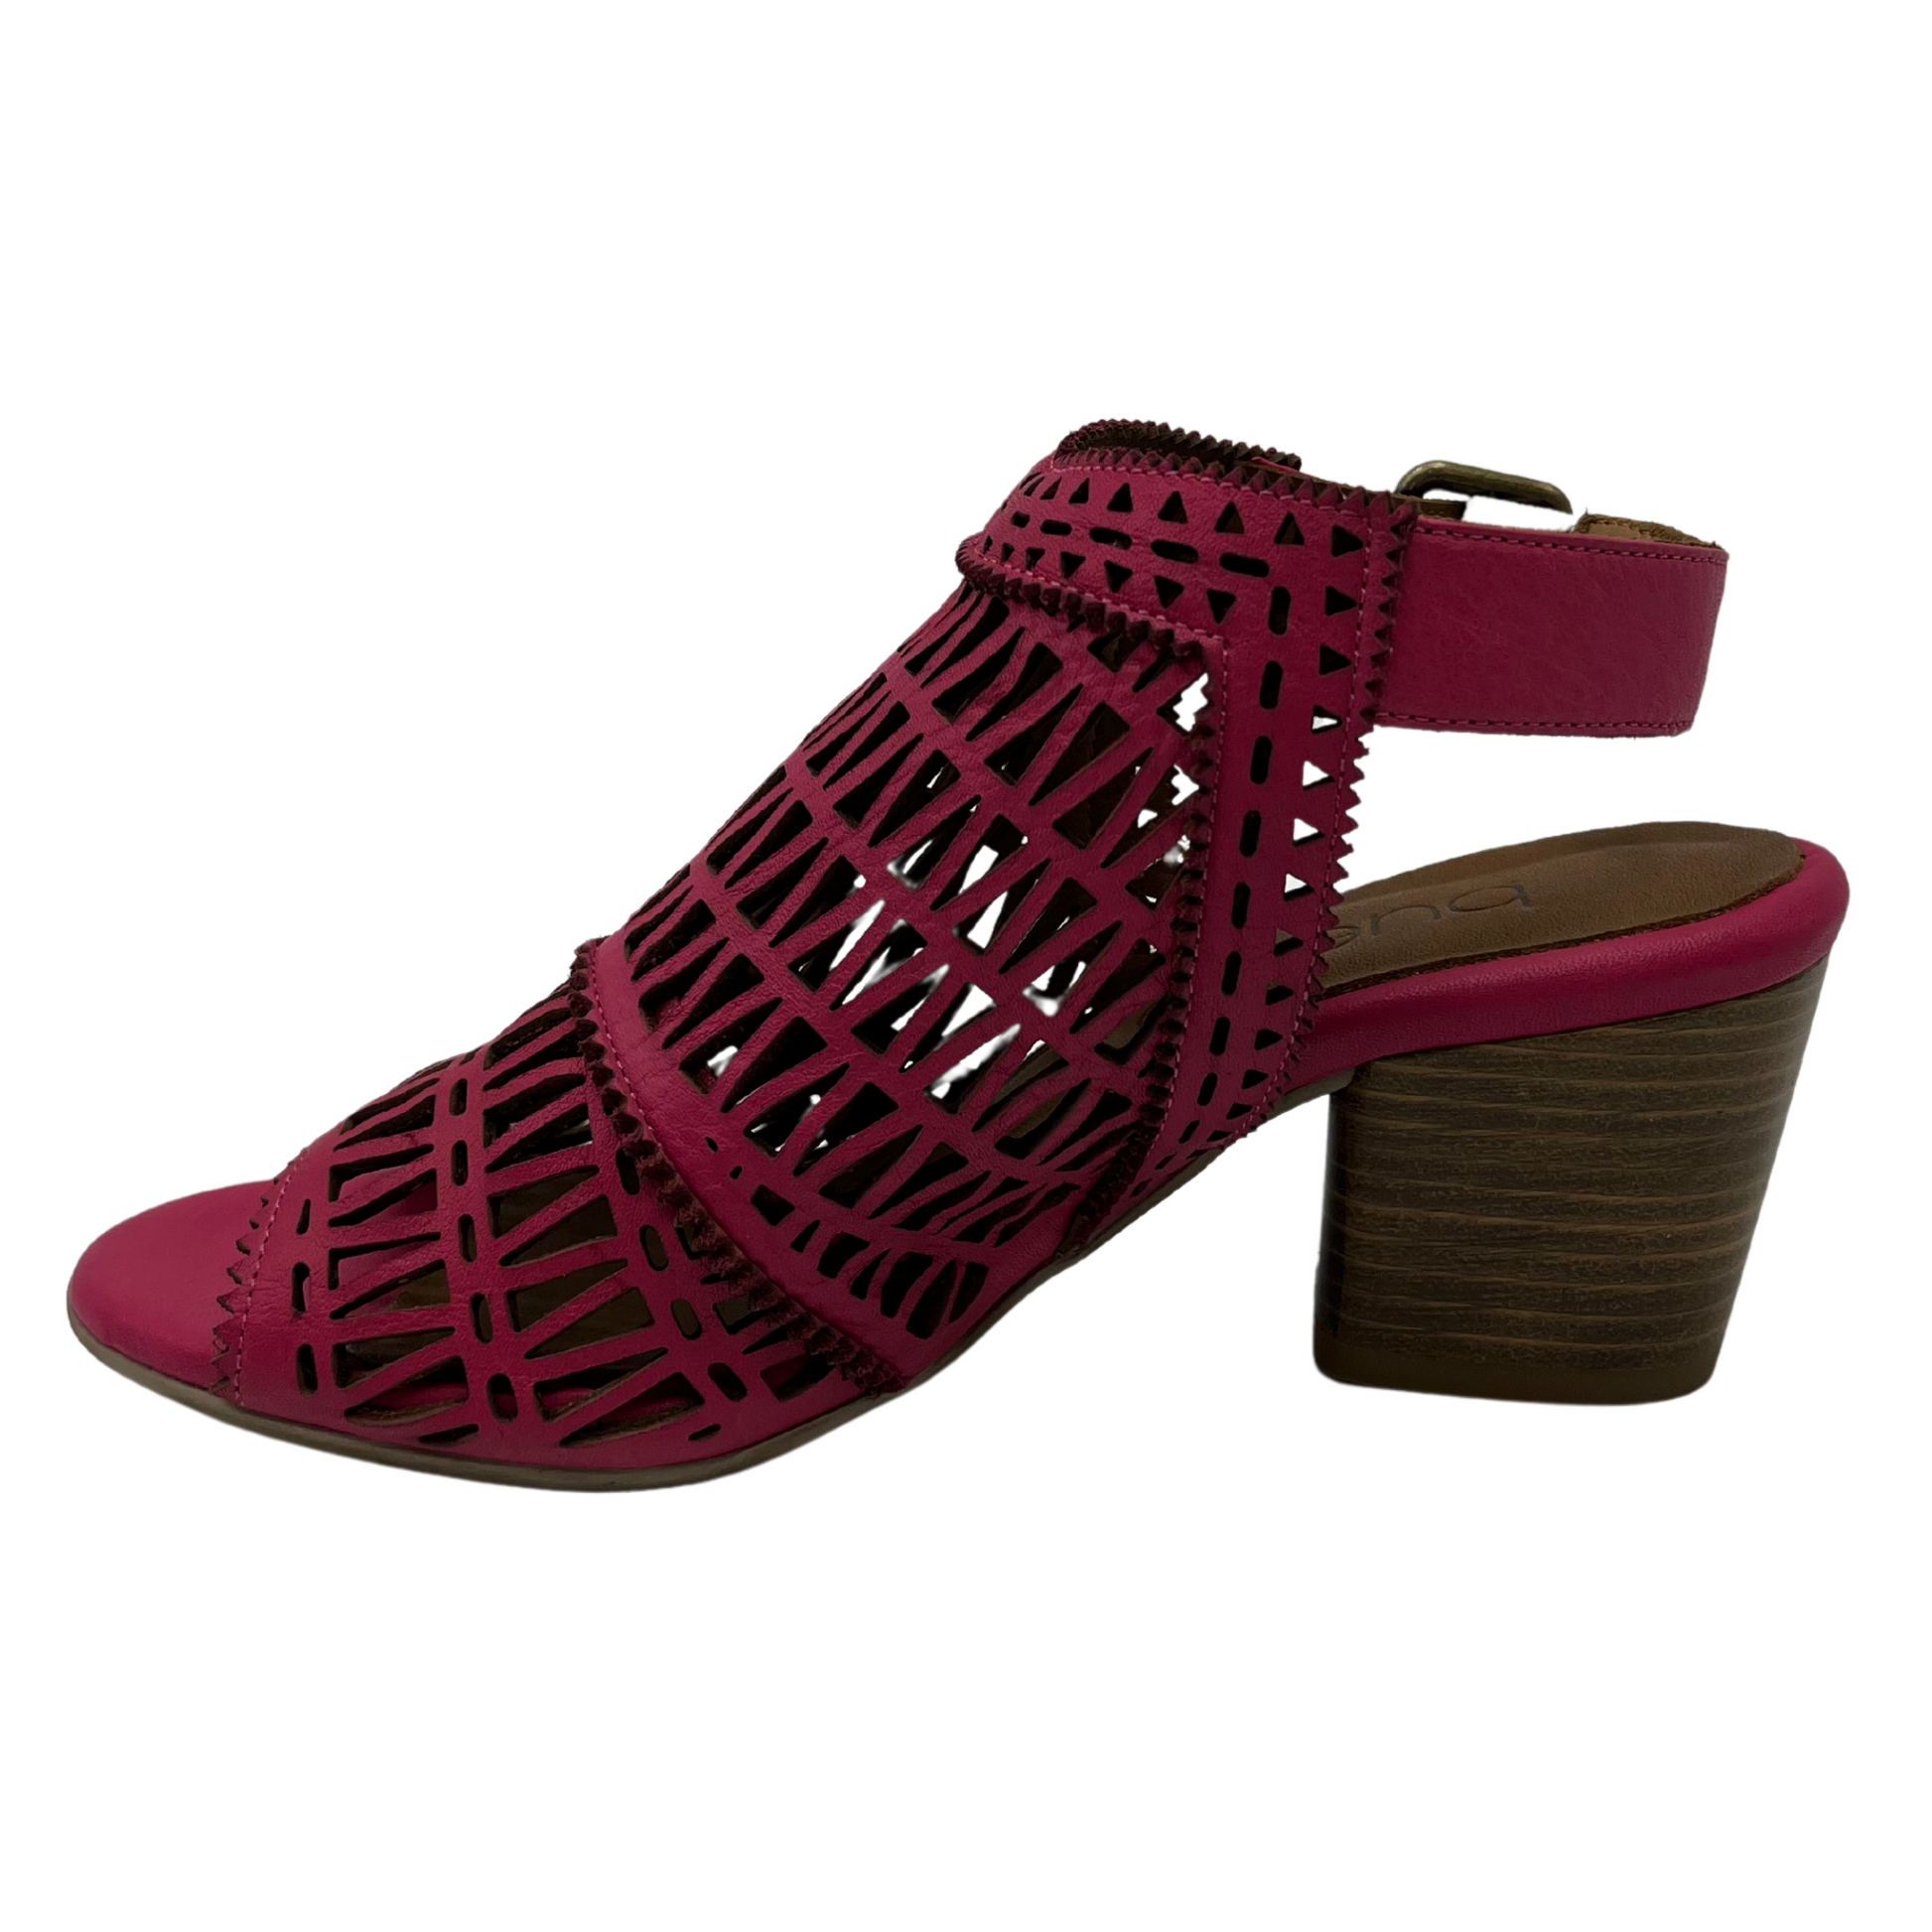 Left facing view of hot pink sandal with block heel, cut out details and peep toe